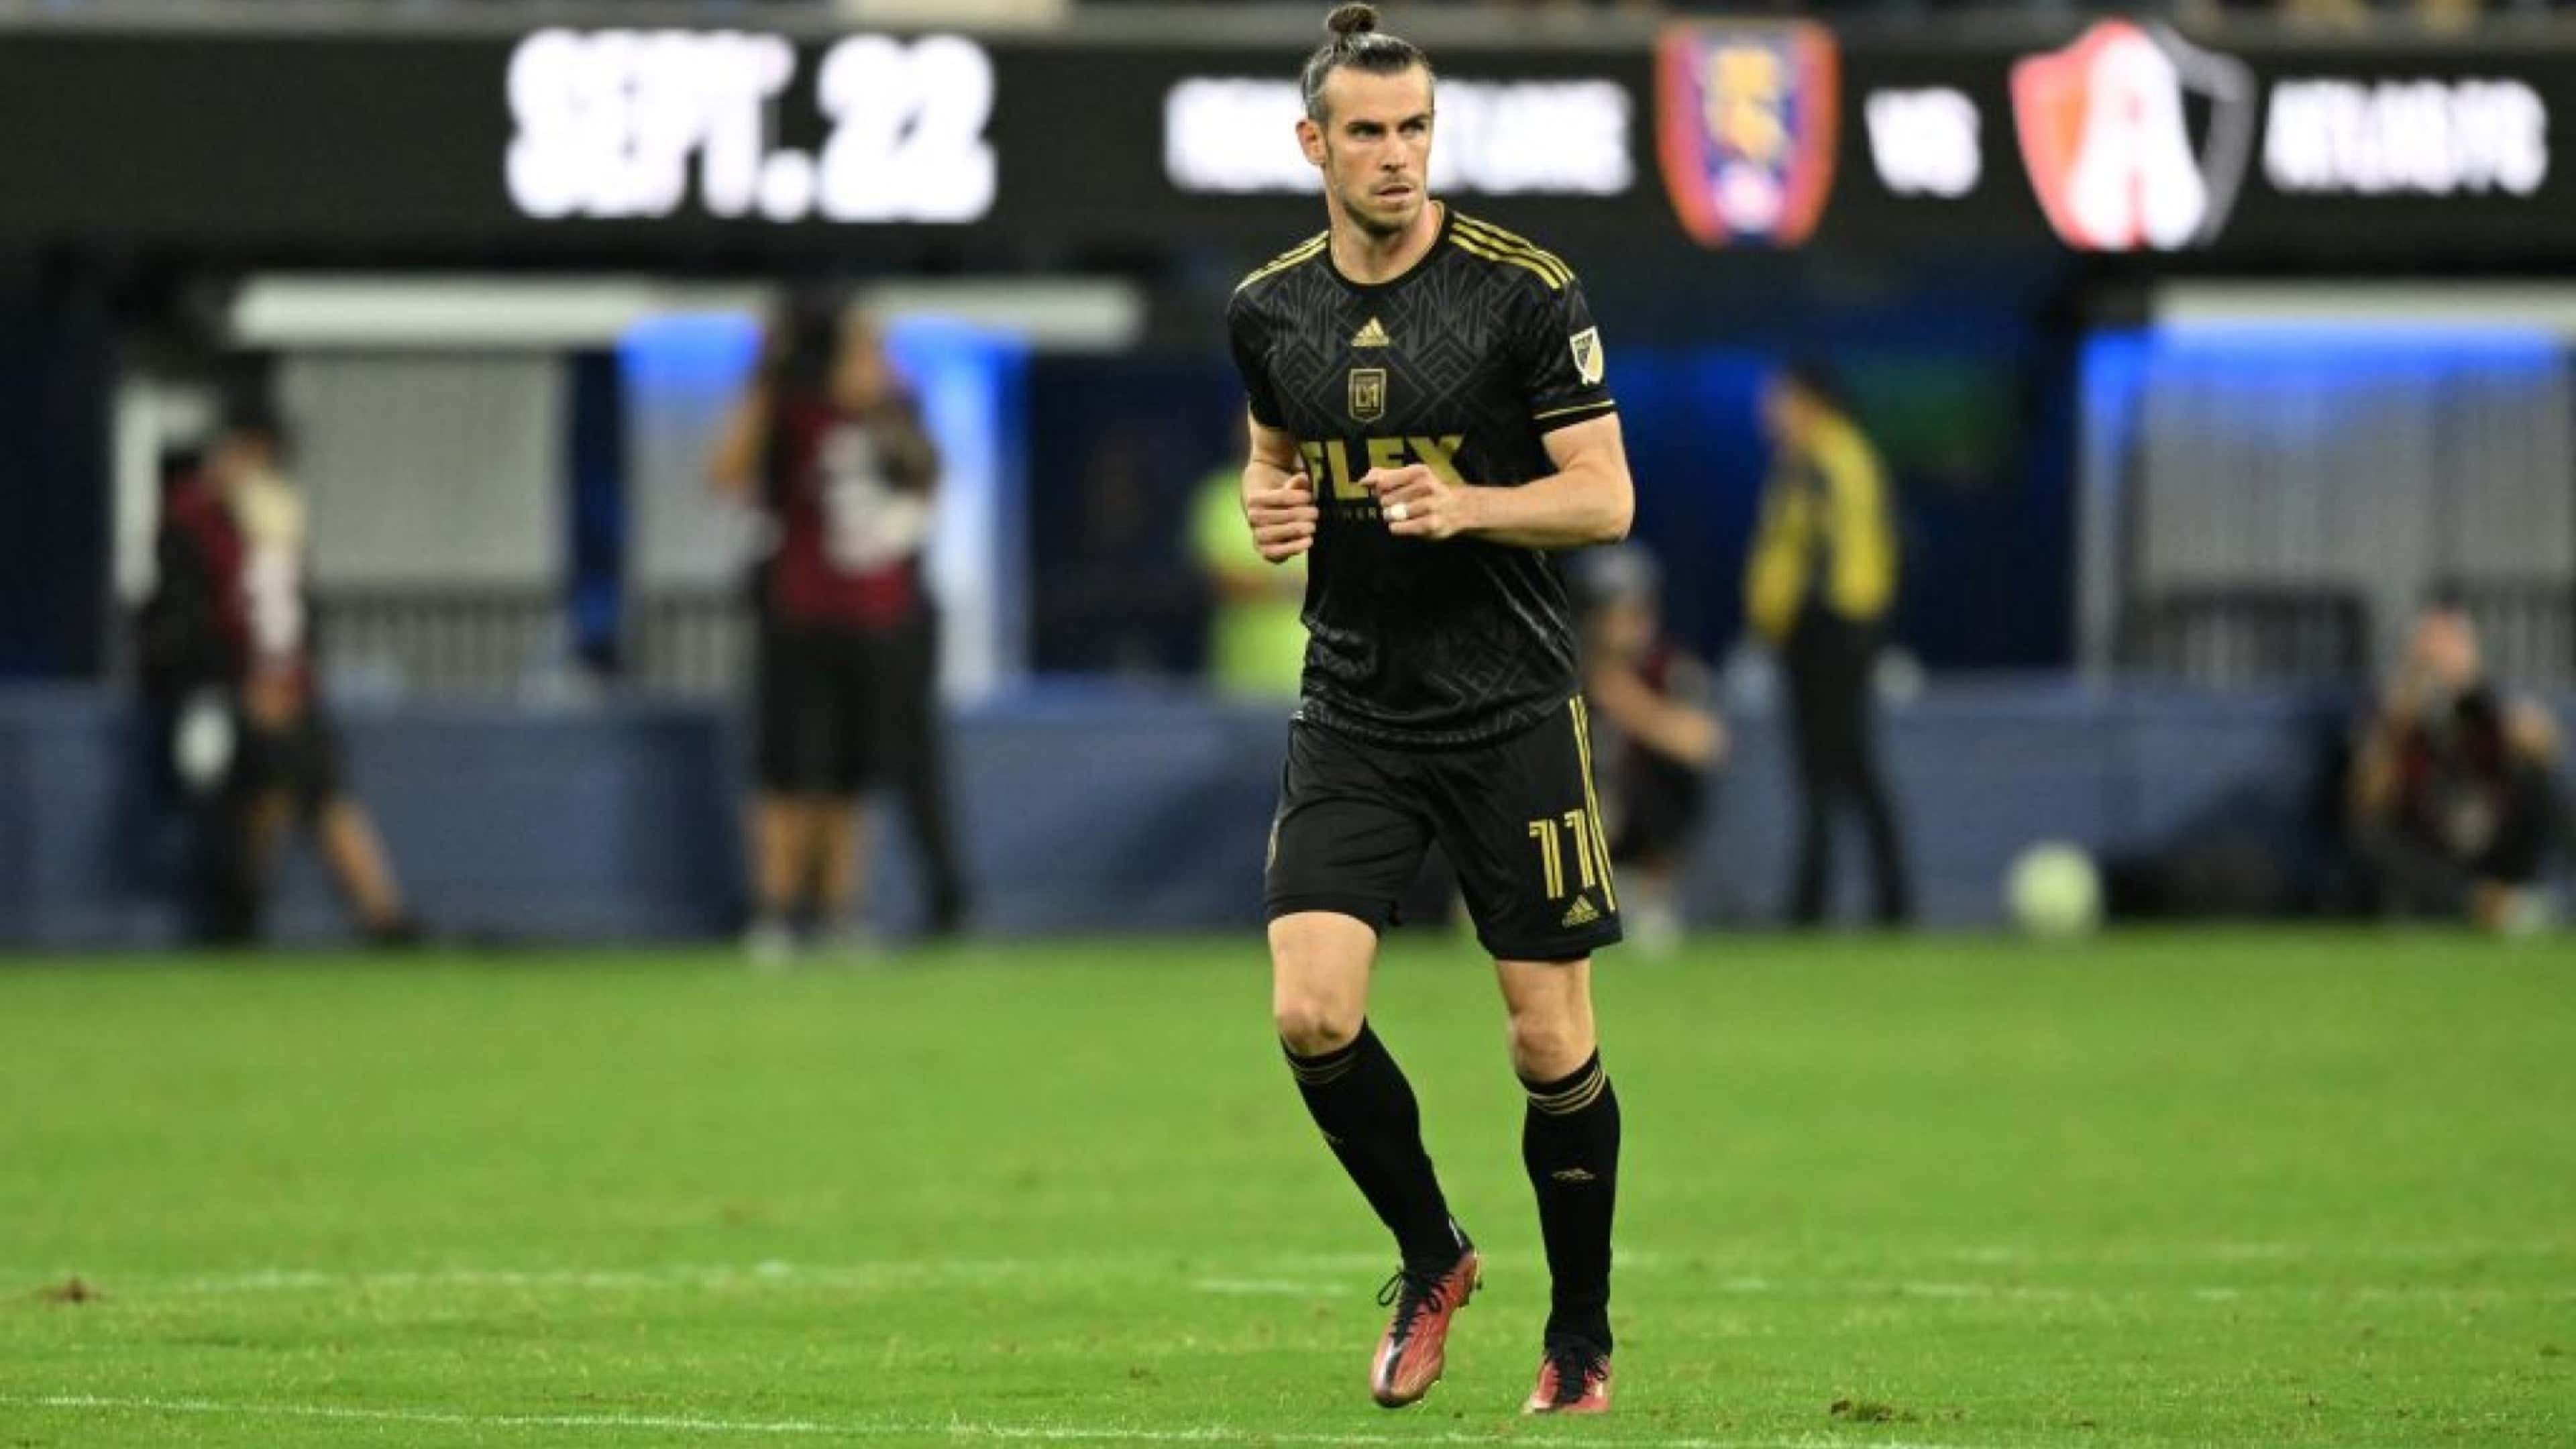 WATCH: Gareth Bale returns to LAFC for pregame MLS Cup championship ring  ceremony